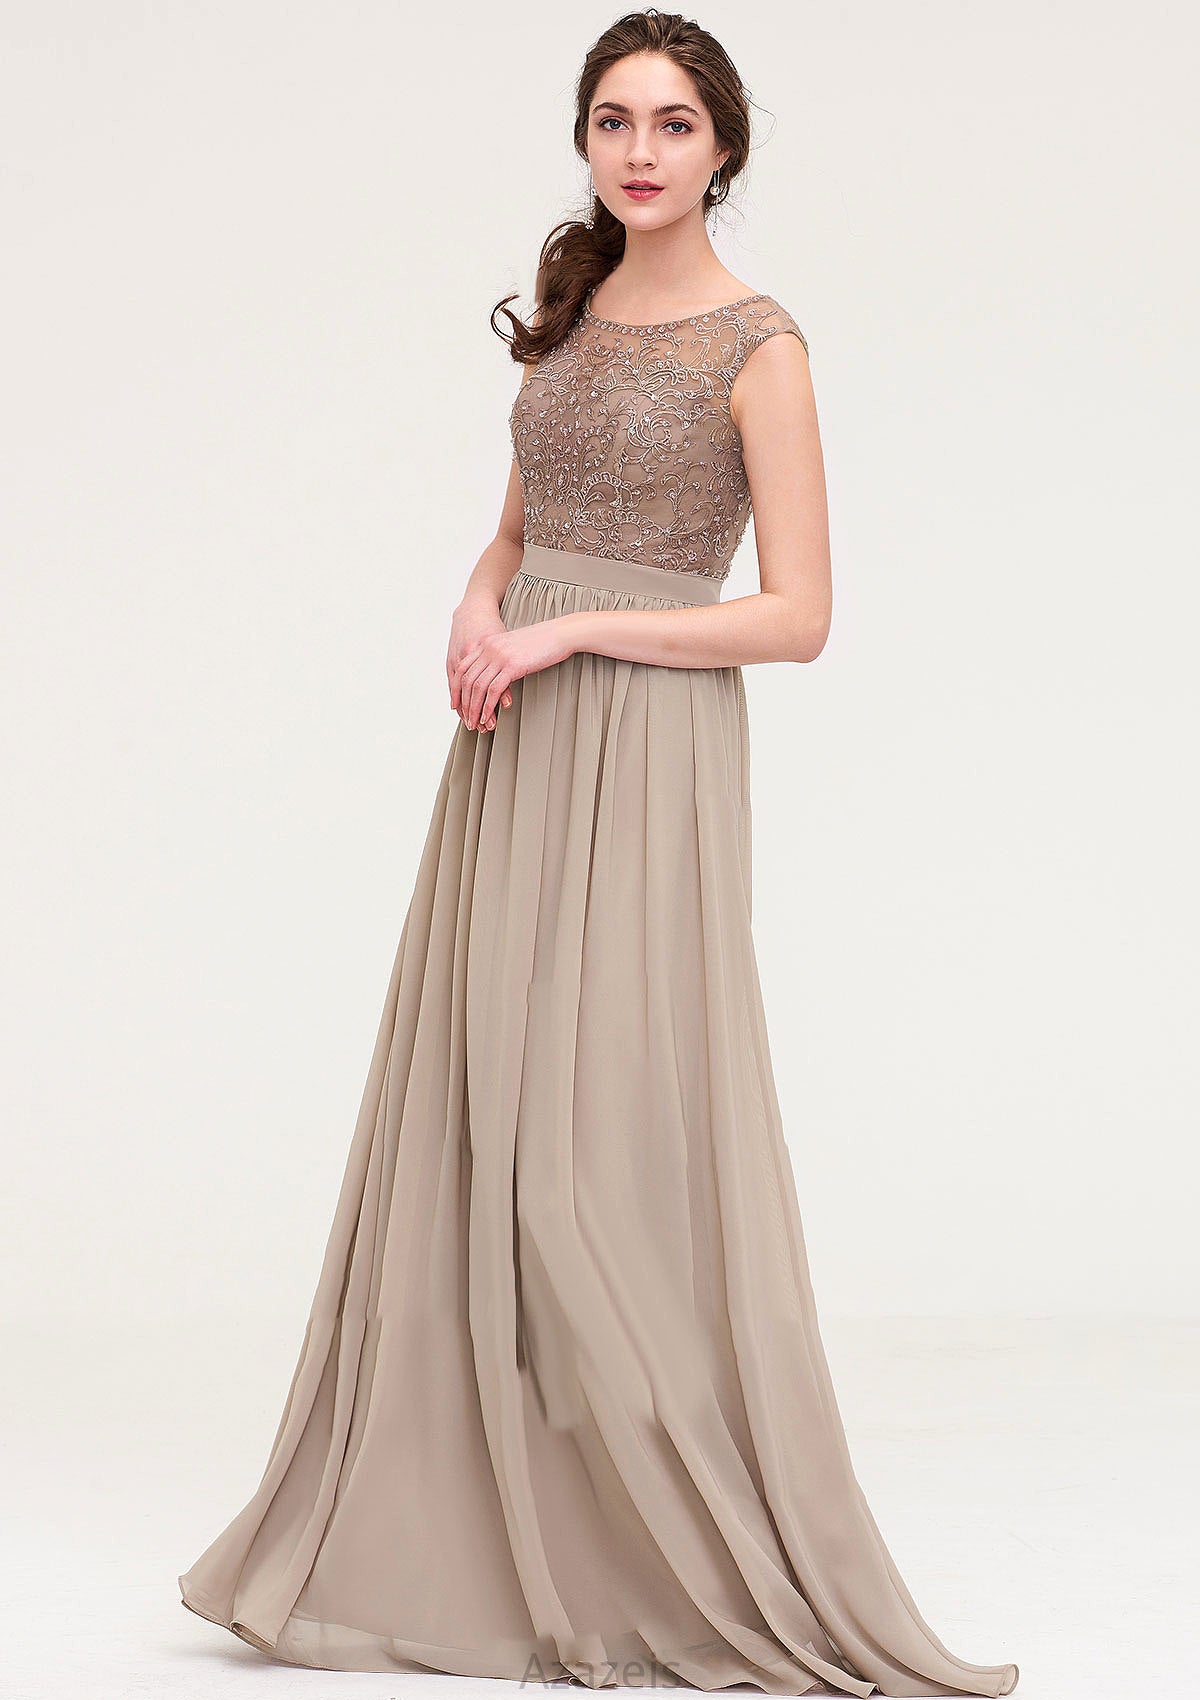 Sleeveless Scoop Neck Long/Floor-Length Chiffon A-line/Princess Bridesmaid Dresses With Sequins Beading Lace Pleated Evelin DFP0025493